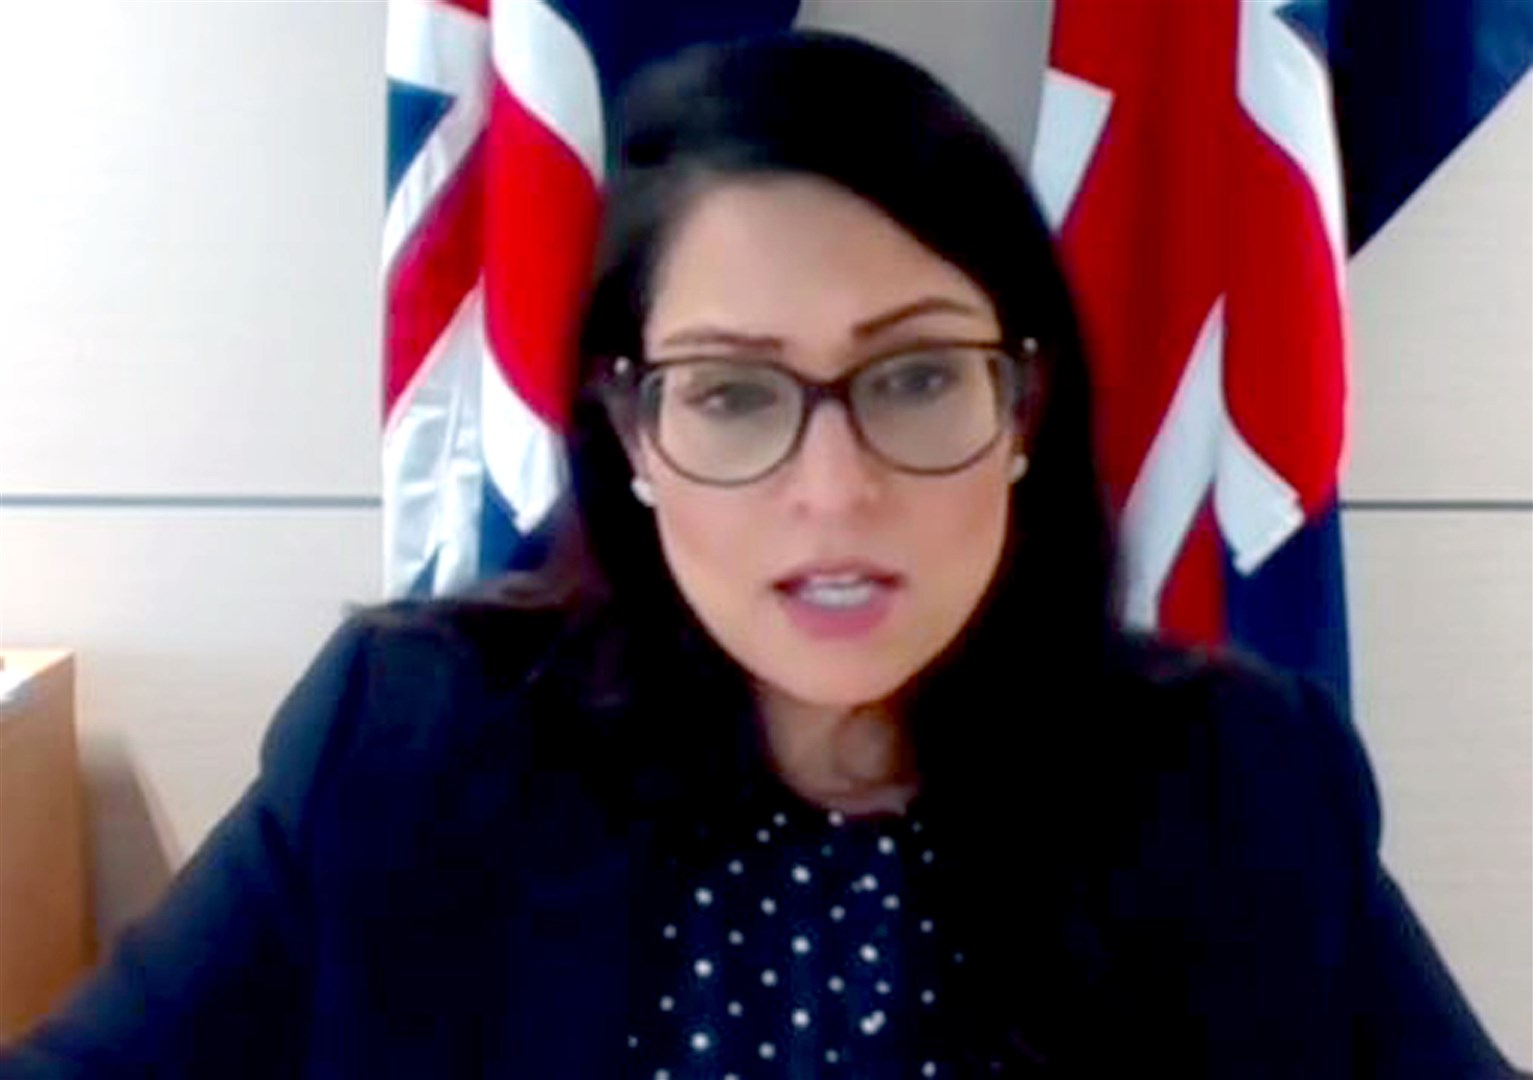 Home Secretary Priti Patel vowed to ask further questions about the investigation (Parliament TV/PA)